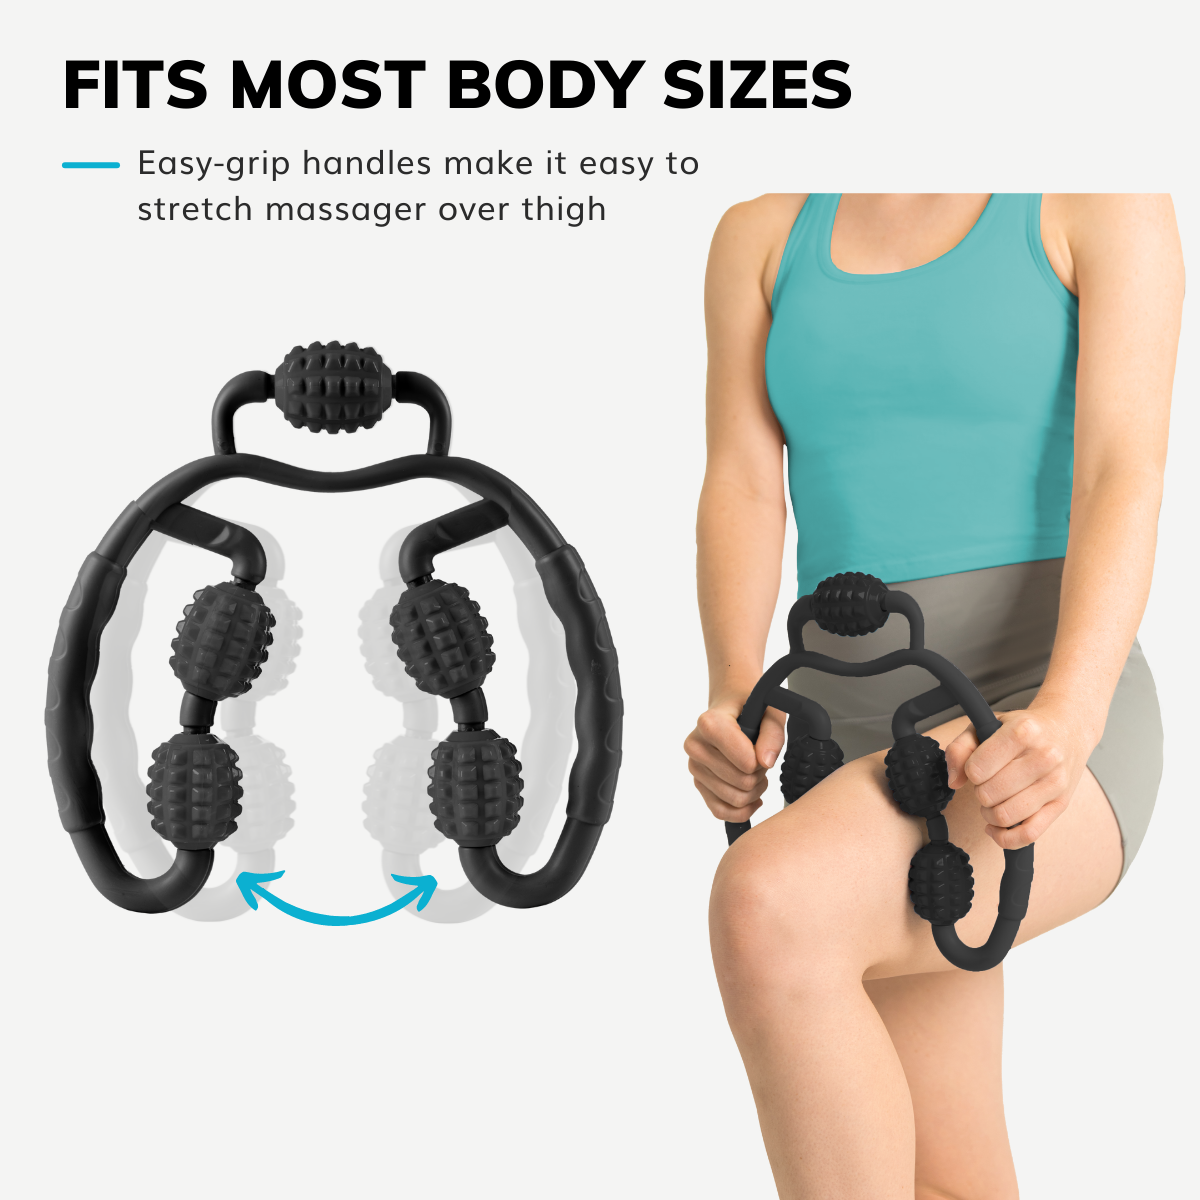 Our roller massager has easy grip handles making it easy to stretch even over wide thighs for cellulite